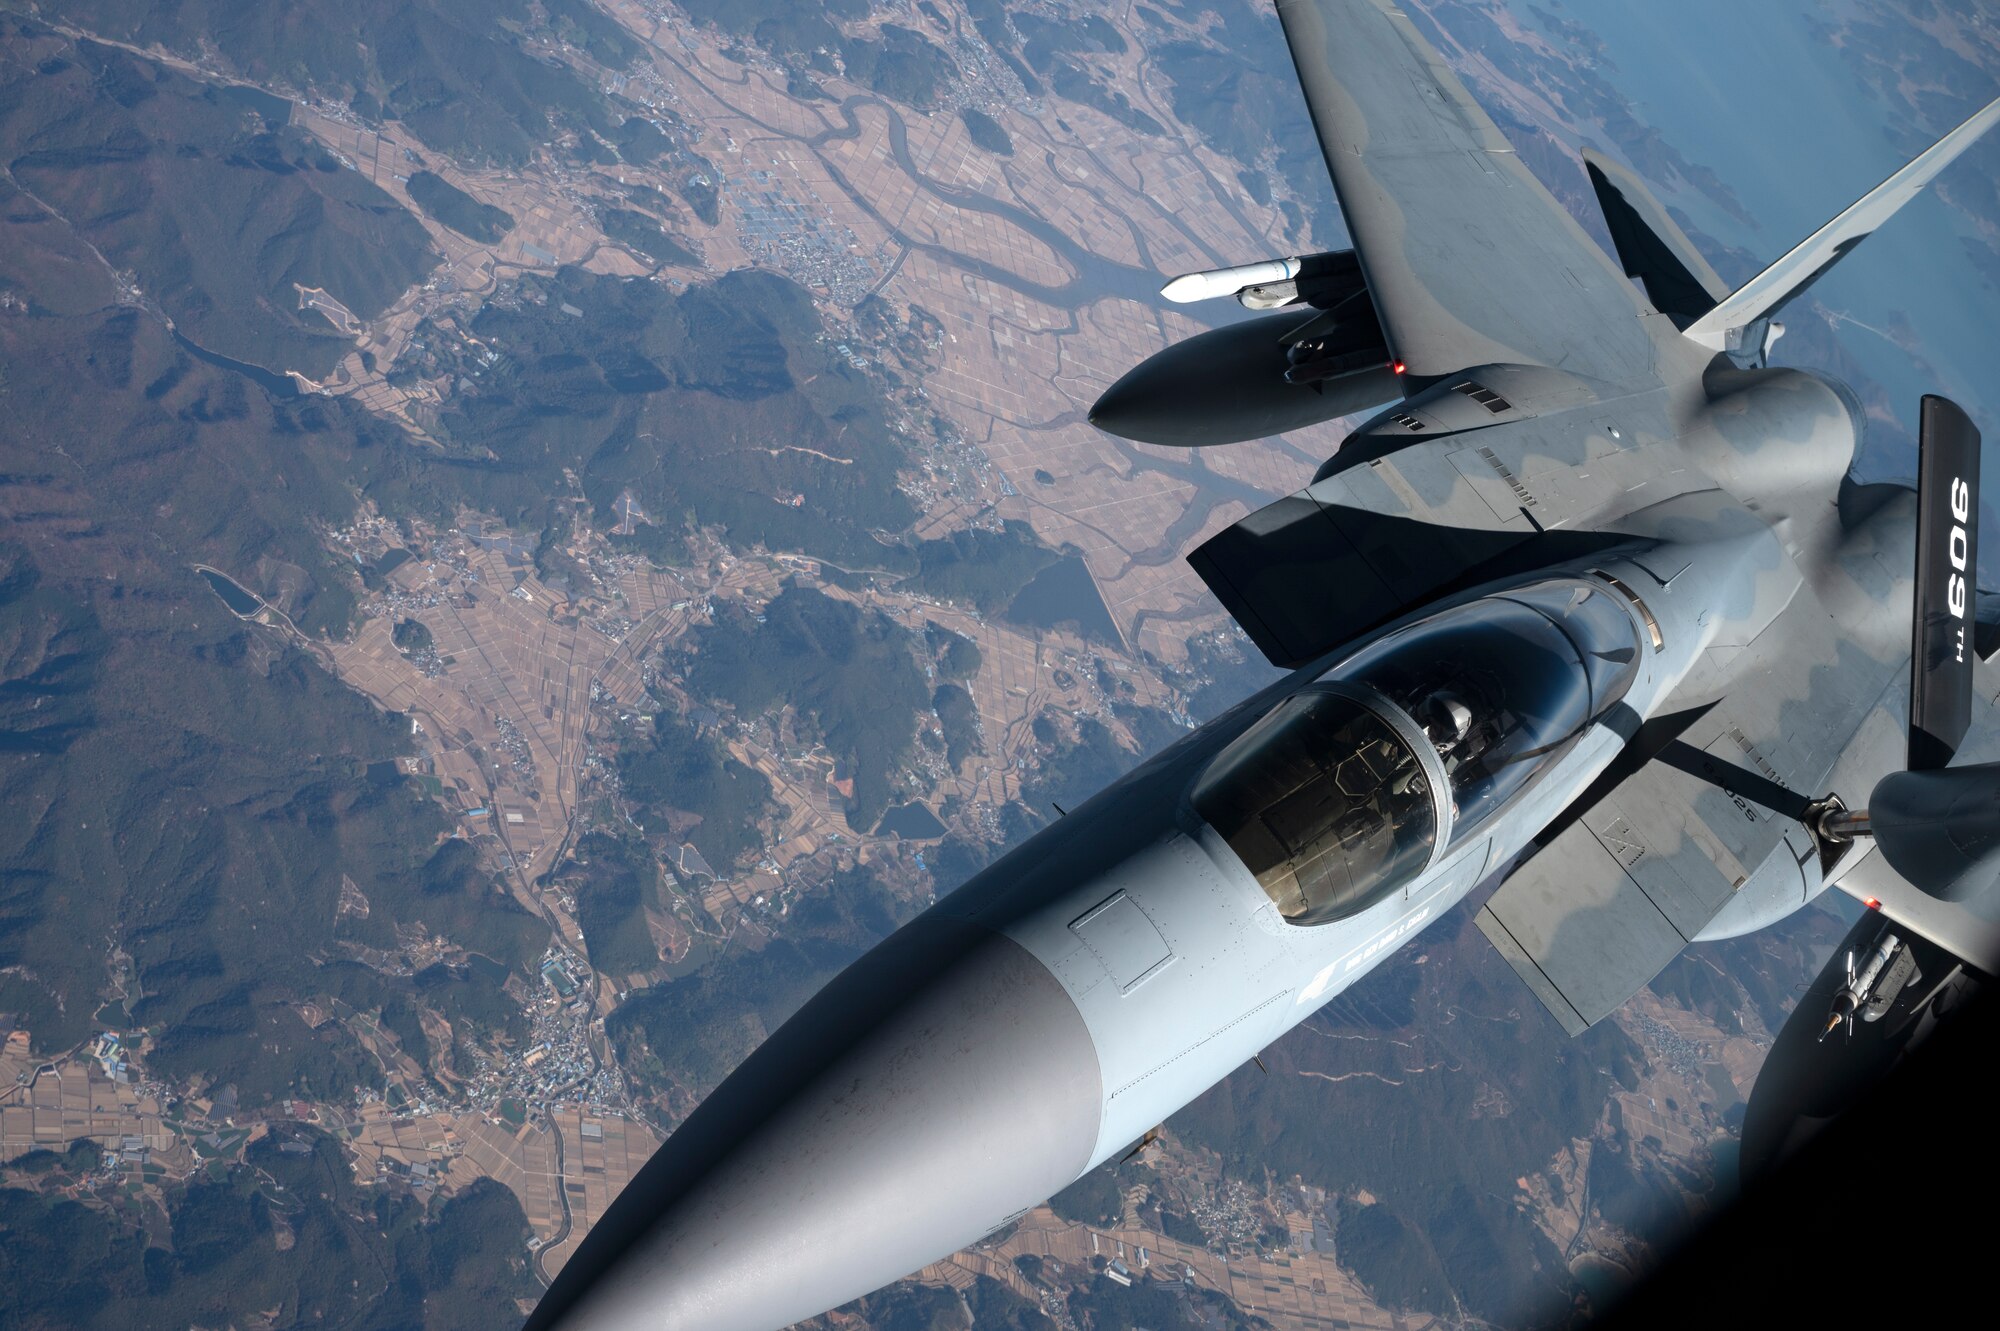 A U.S. Air Force 44th Fighter Squadron F-15C Eagle receives fuel from a 909th Air Refueling Squadron KC-135 Stratotanker over South Korea, Nov. 4, 2022. Kadena received its first F-15 C's in 1979. Since then, the tactical fighter has provided unmatched air superiority for the Indo-Pacific region. (U.S. Air Force photo by Senior Airman Jessi Roth)